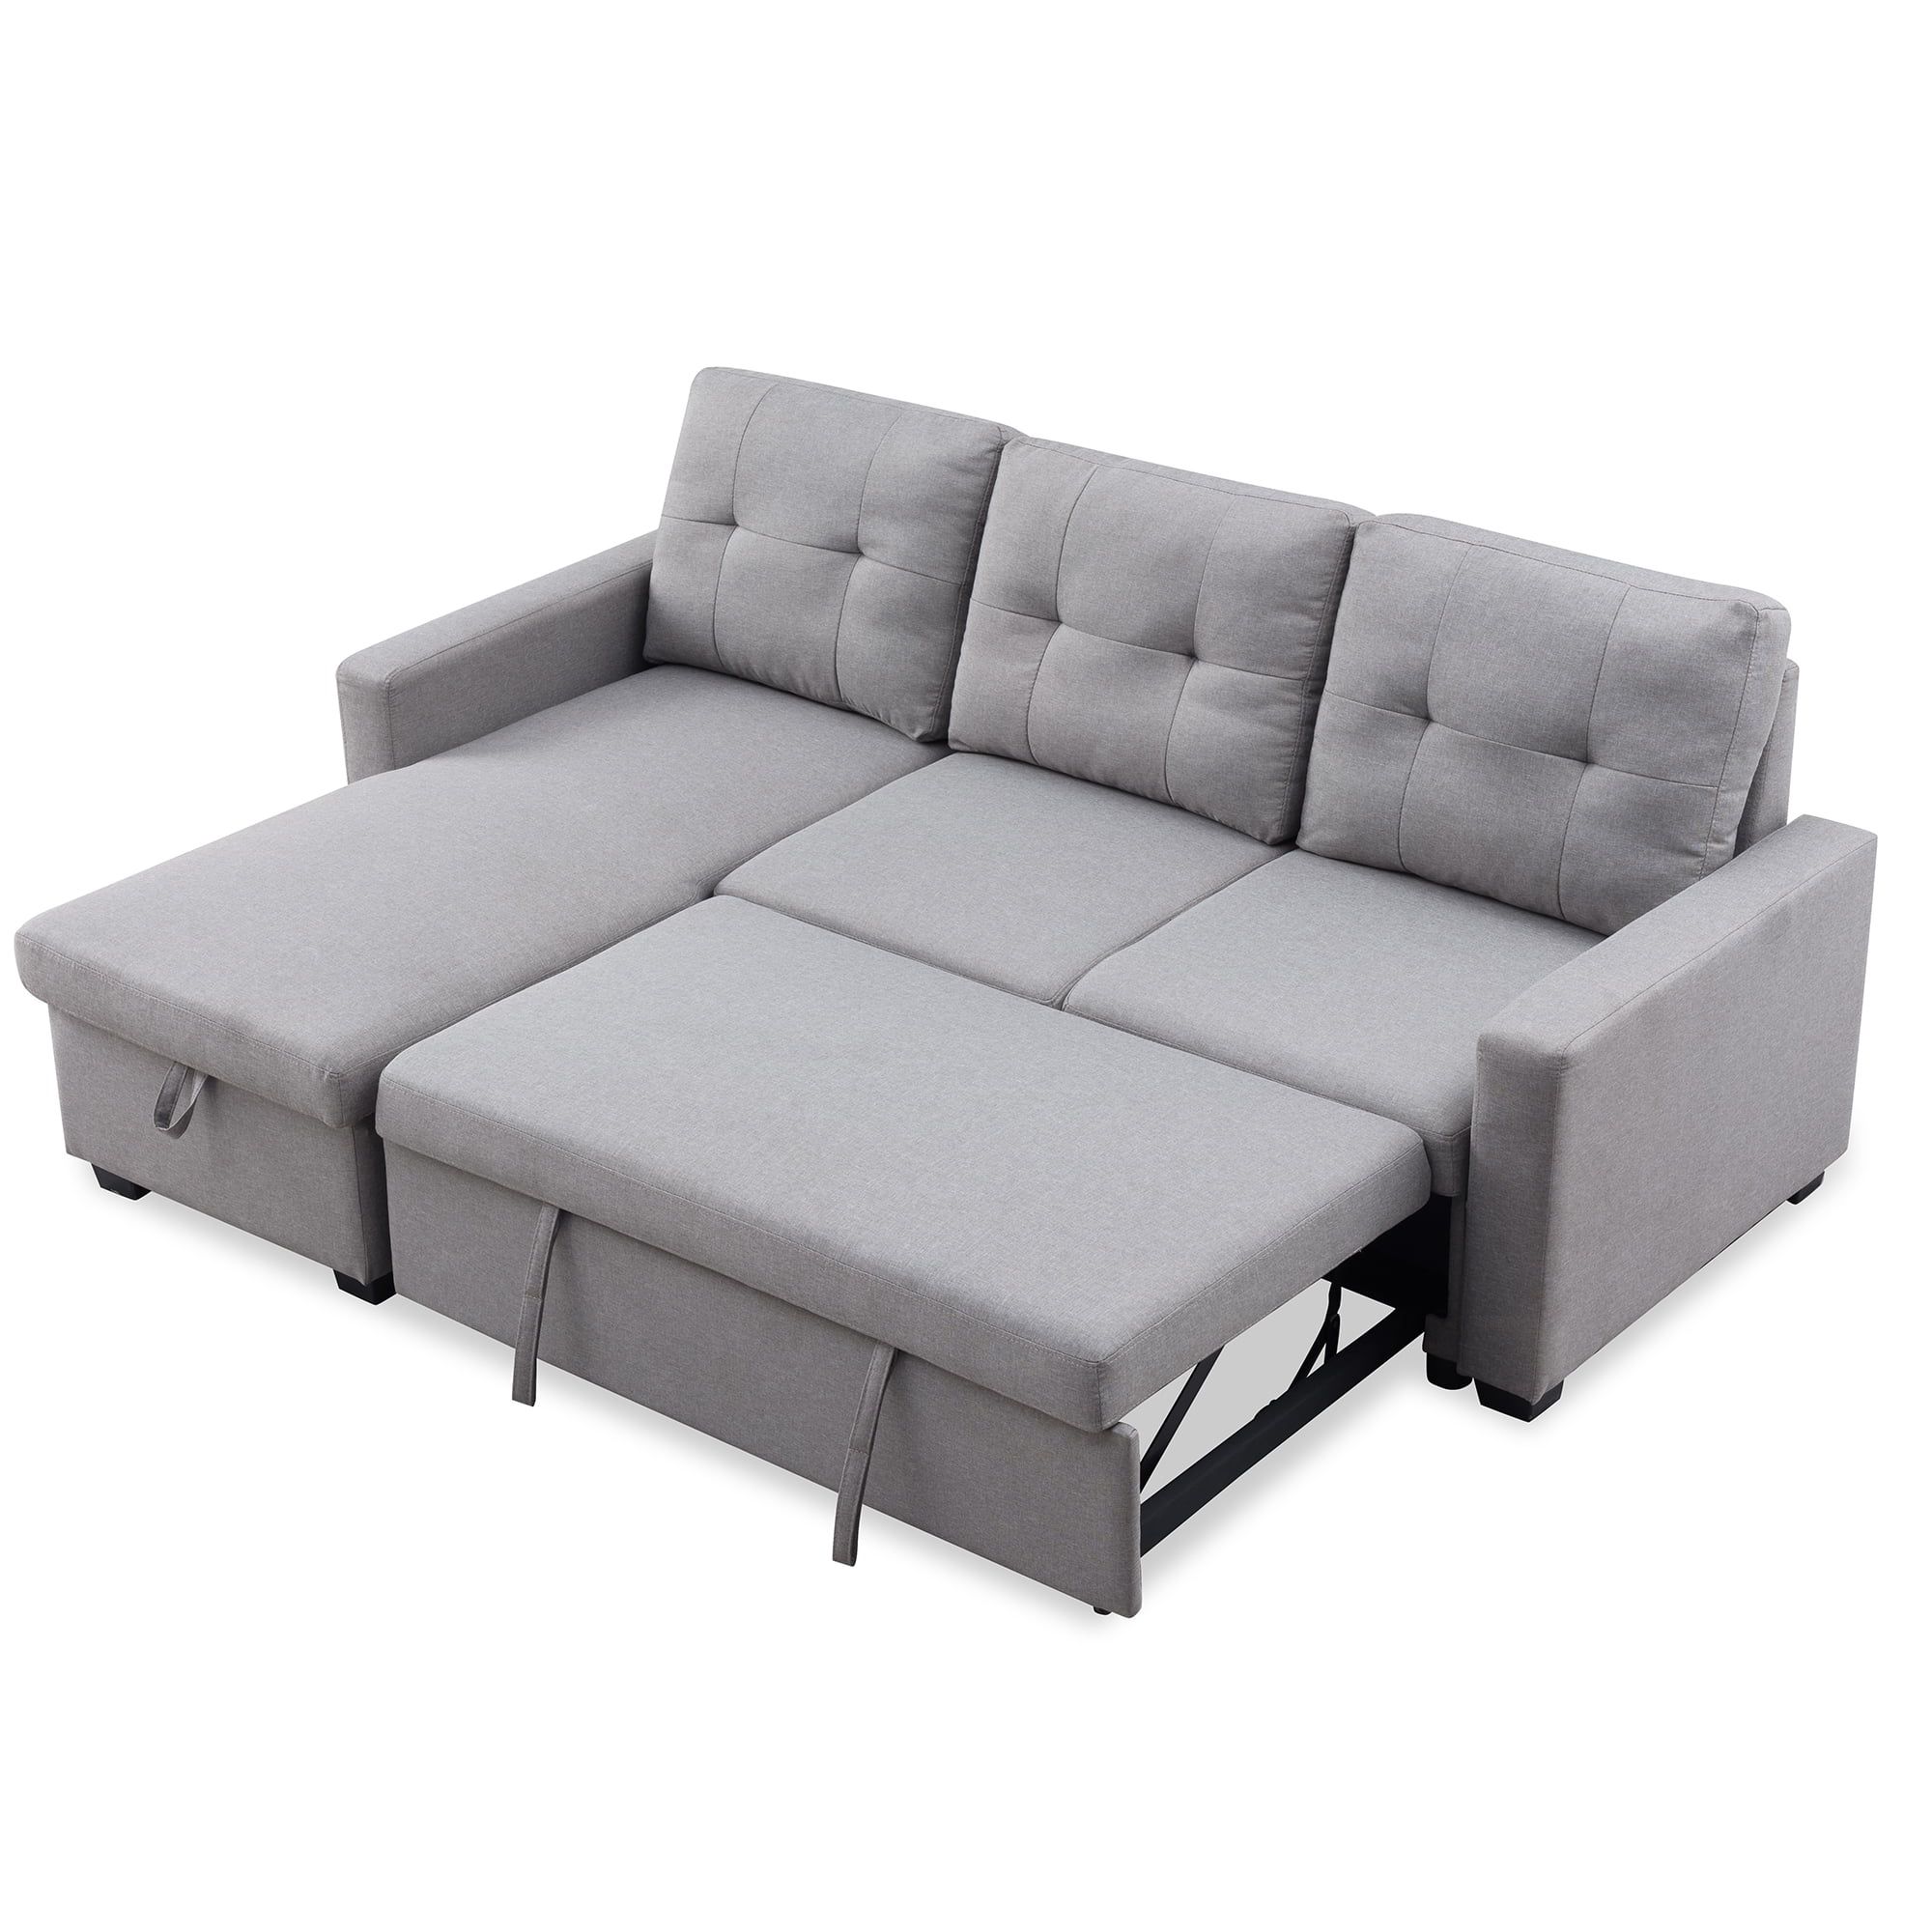 Tufted Sectional Sofa Bed With Fold Out Pull Out Sleeper And Reversible Within 2 In 1 Gray Pull Out Sofa Beds (Gallery 8 of 20)